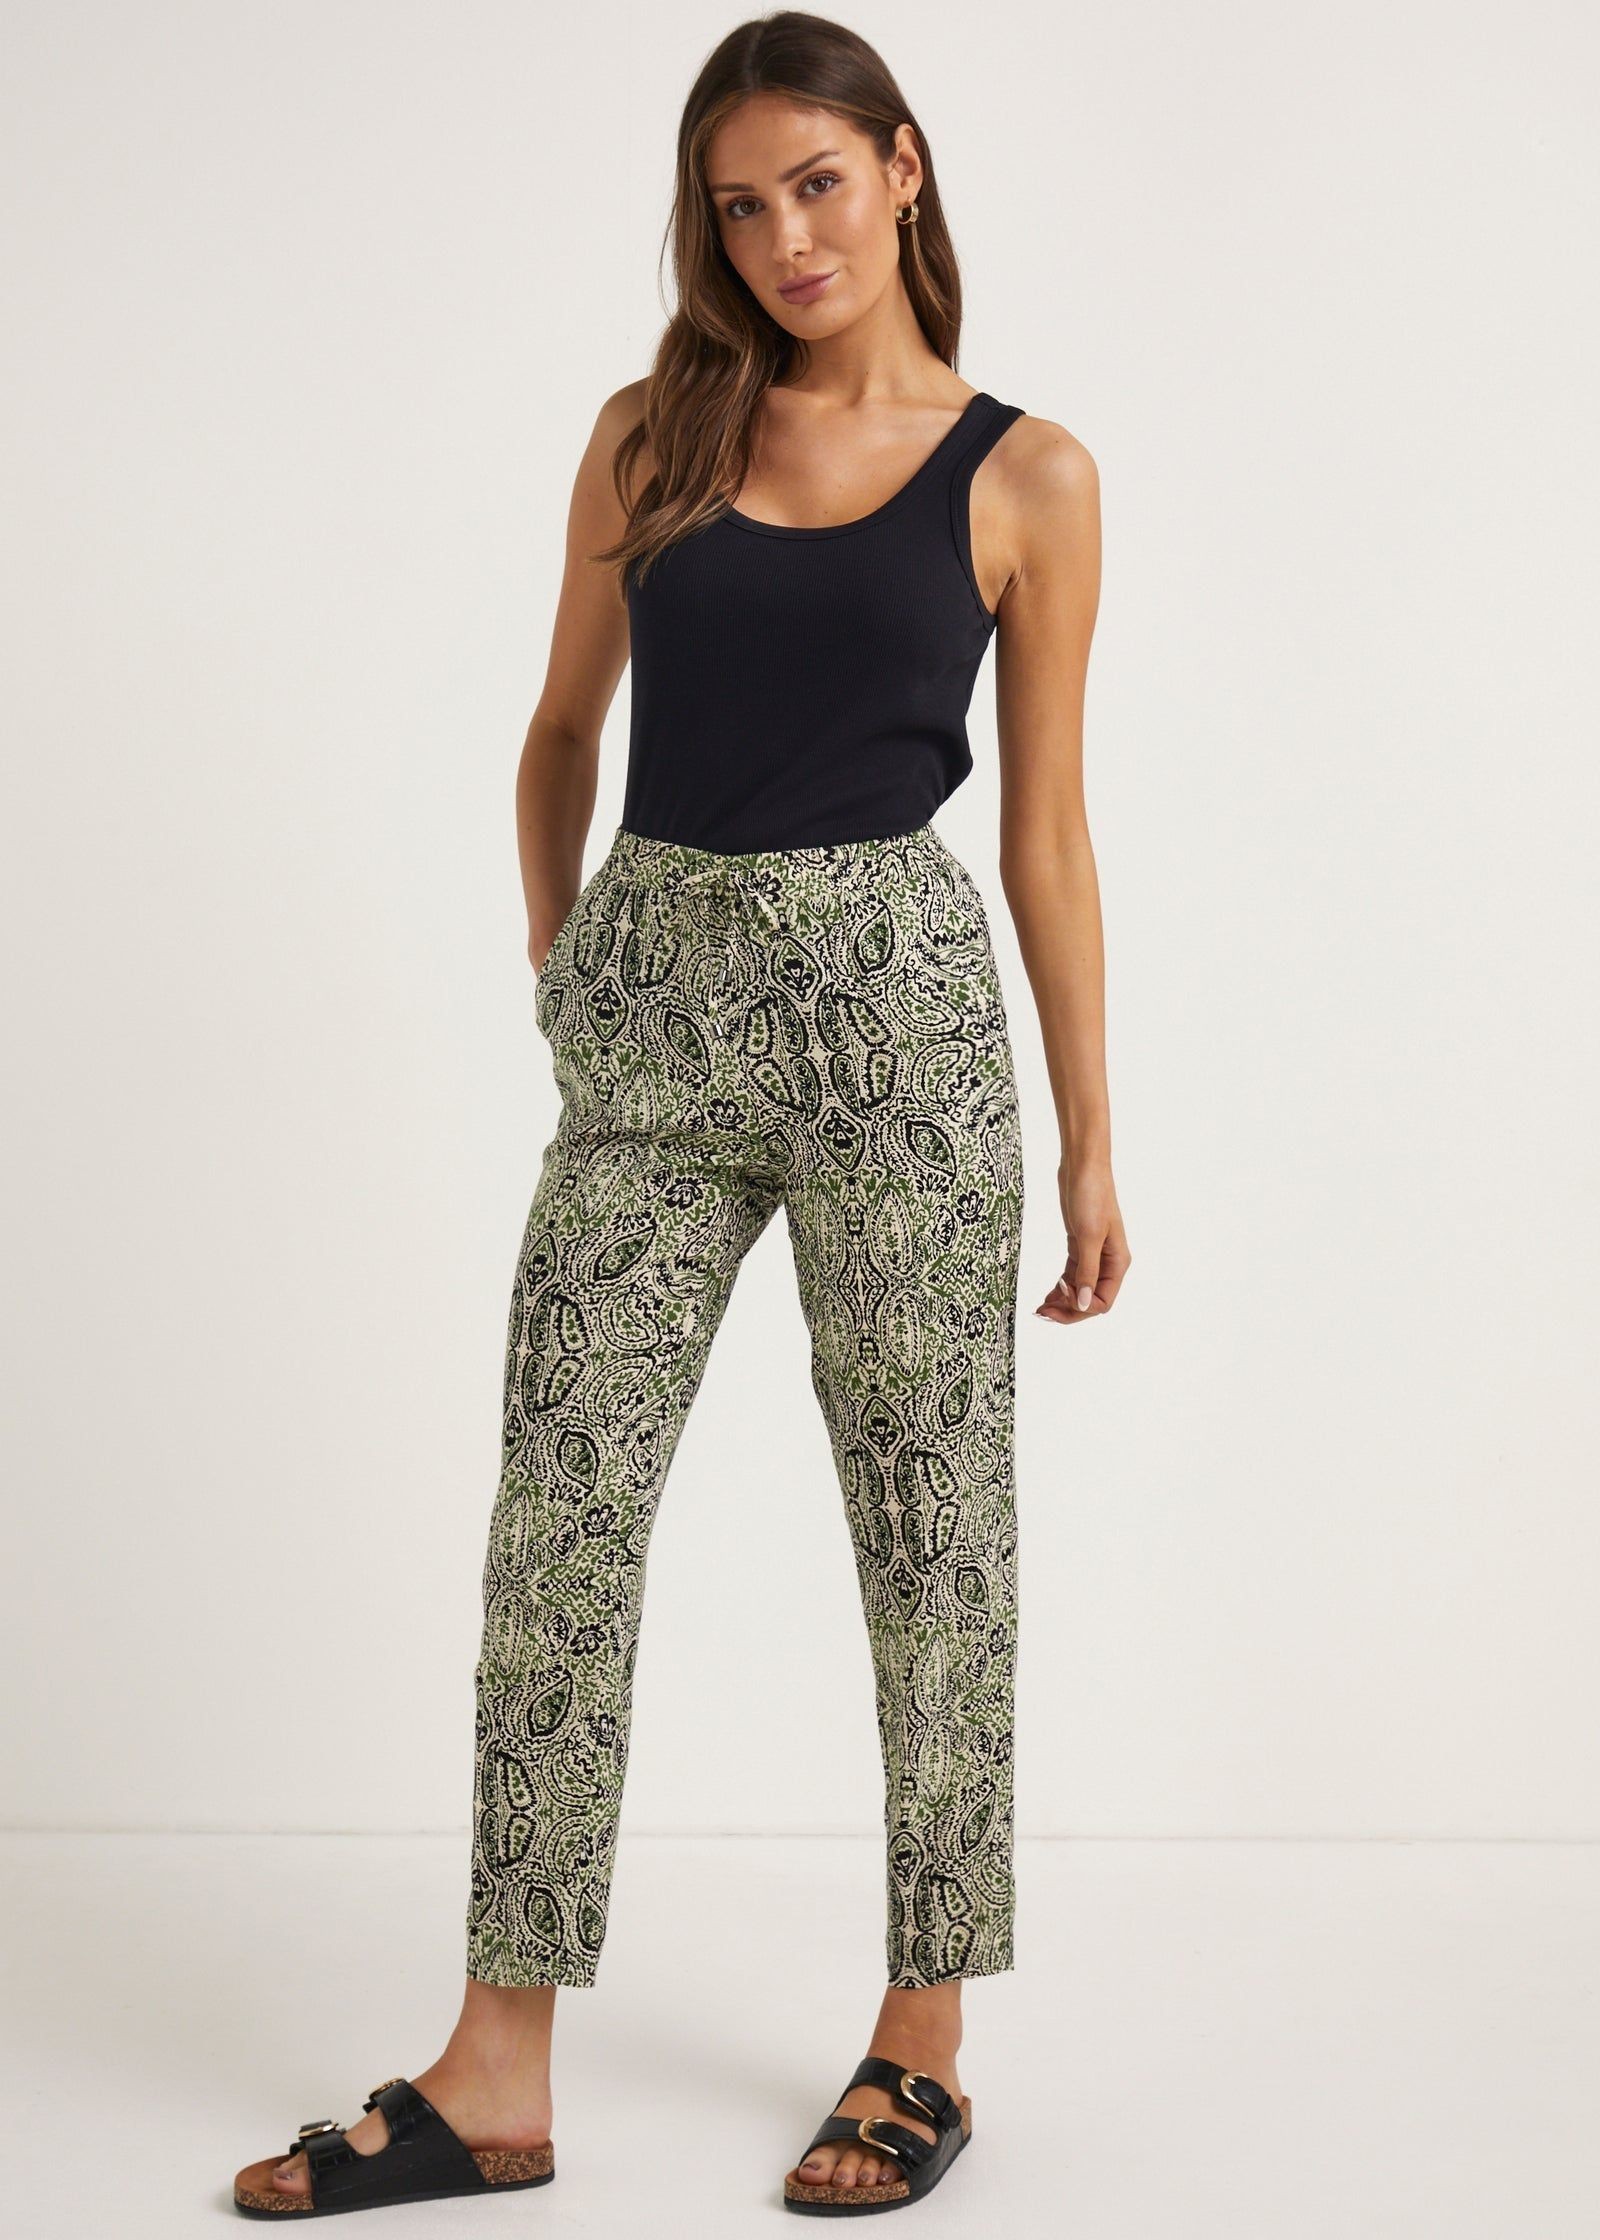 Buy Womens Bottoms at Lowest Price from Matalan Bahrain